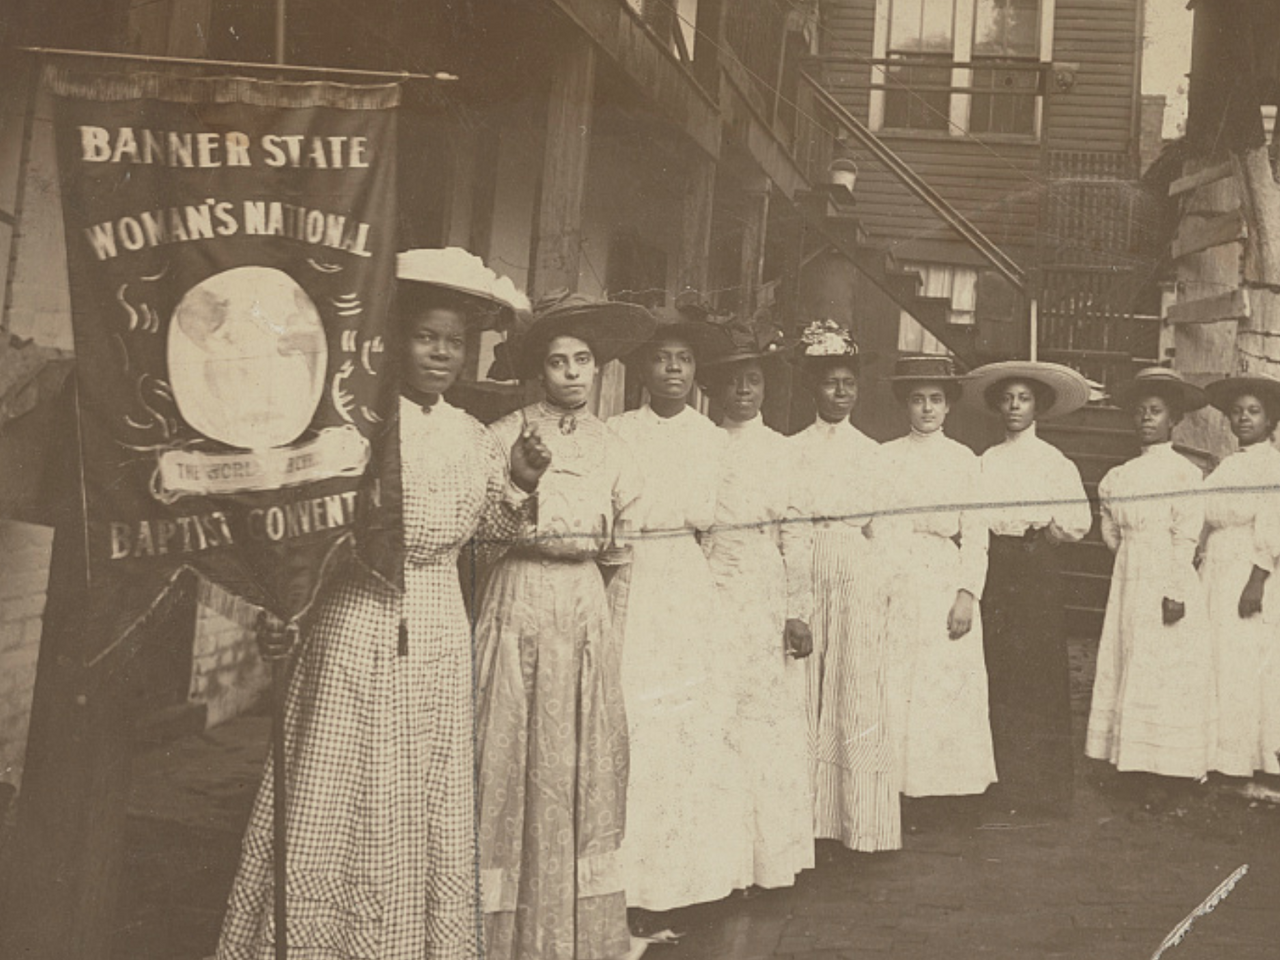 Nine Black women posed standing with one holding a banner that says "Woman's National Baptist Convention"